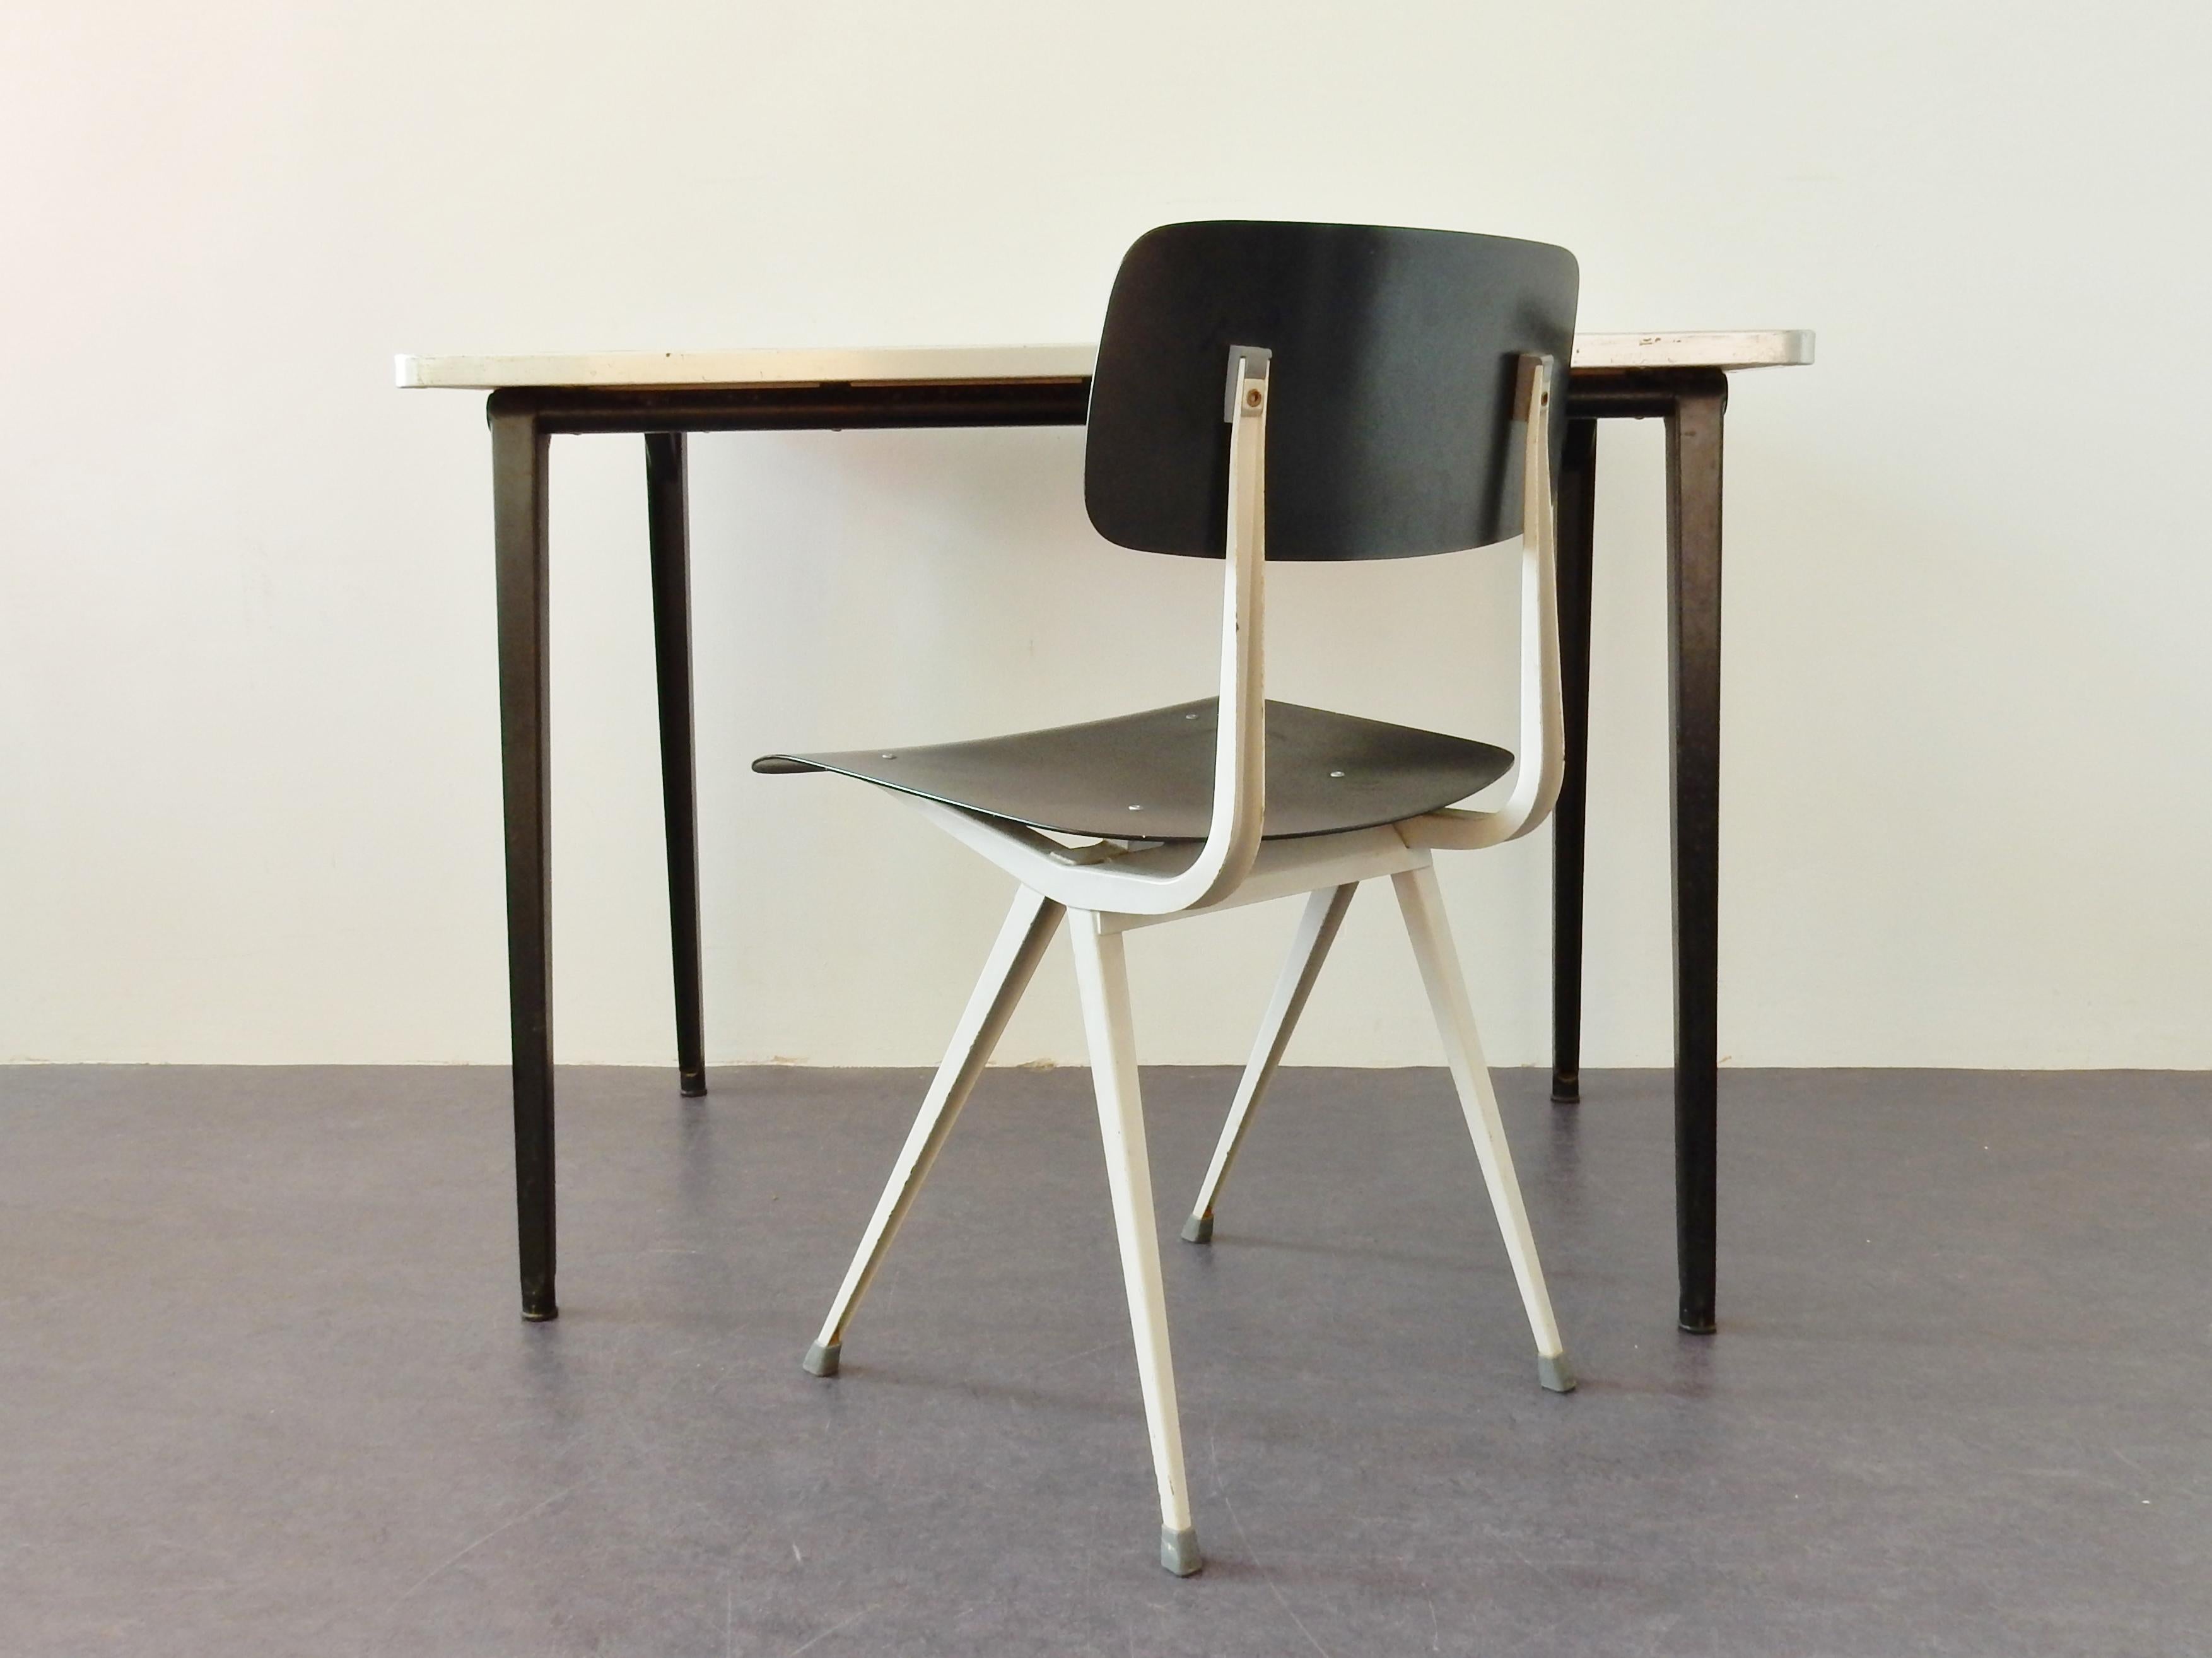 Set of a small, model reform, table desk with a, model result, chair by Friso Kramer for Ahrend de Cirkel. Table and chair are both in a very good, but visibly used and industrial condition. The table has the original and rare green linoleum top.